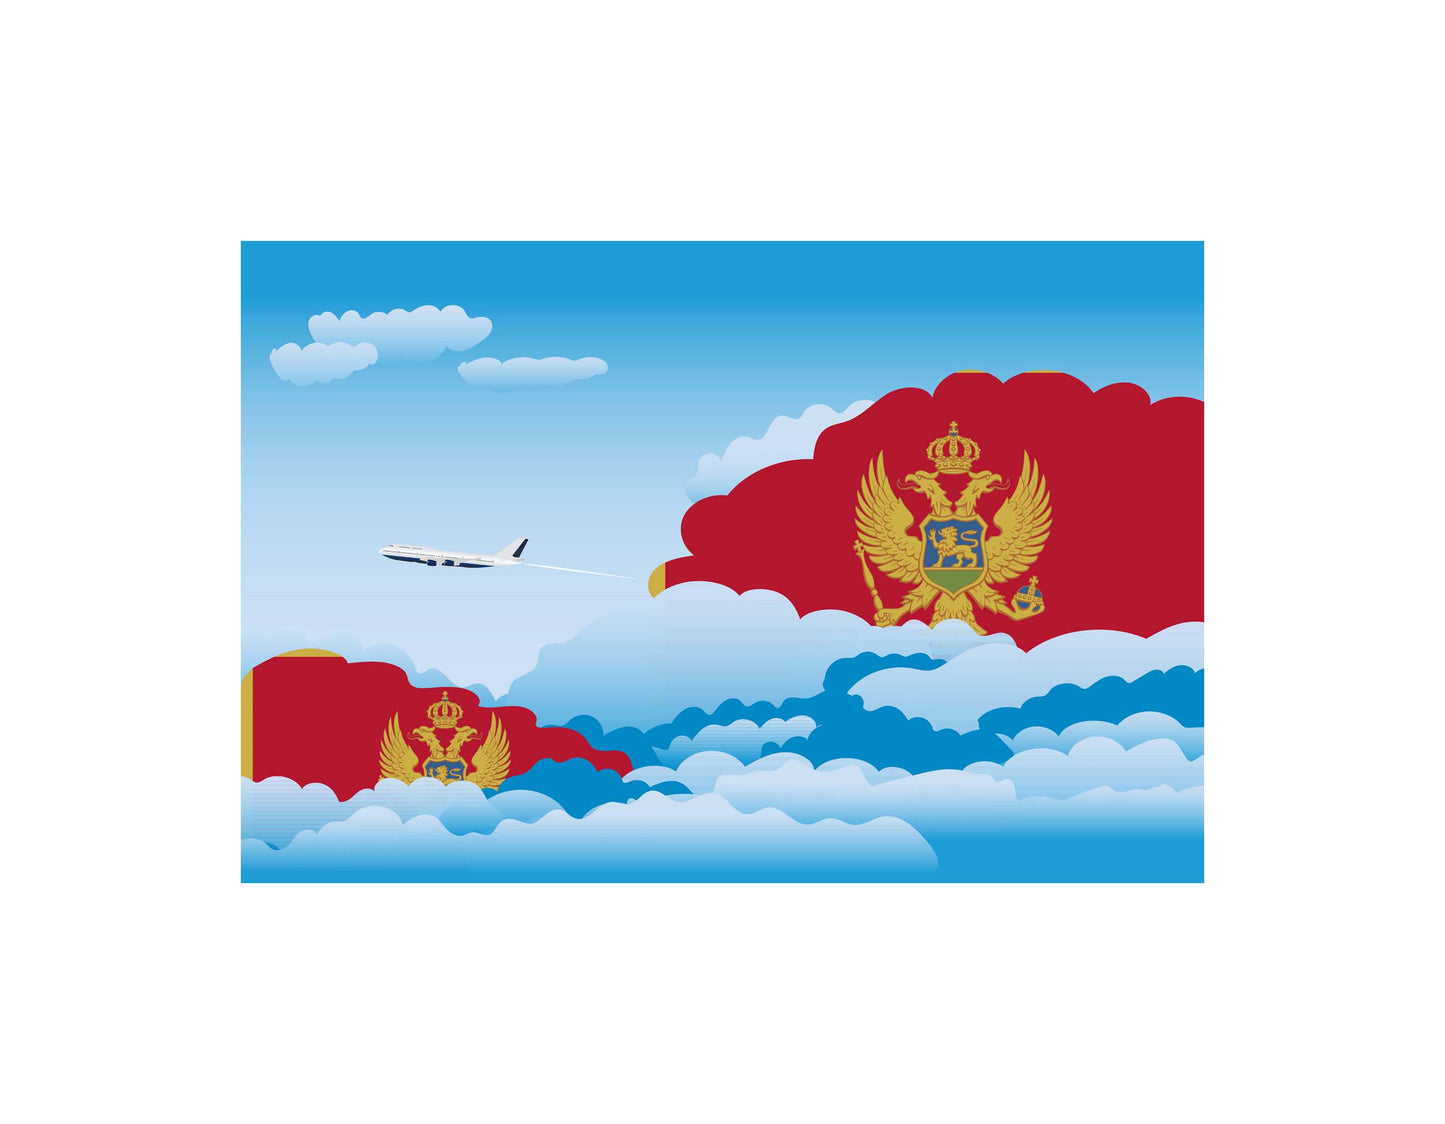 Montenegro Flag Day Clouds Aeroplane Airport Flying Vector Illustration